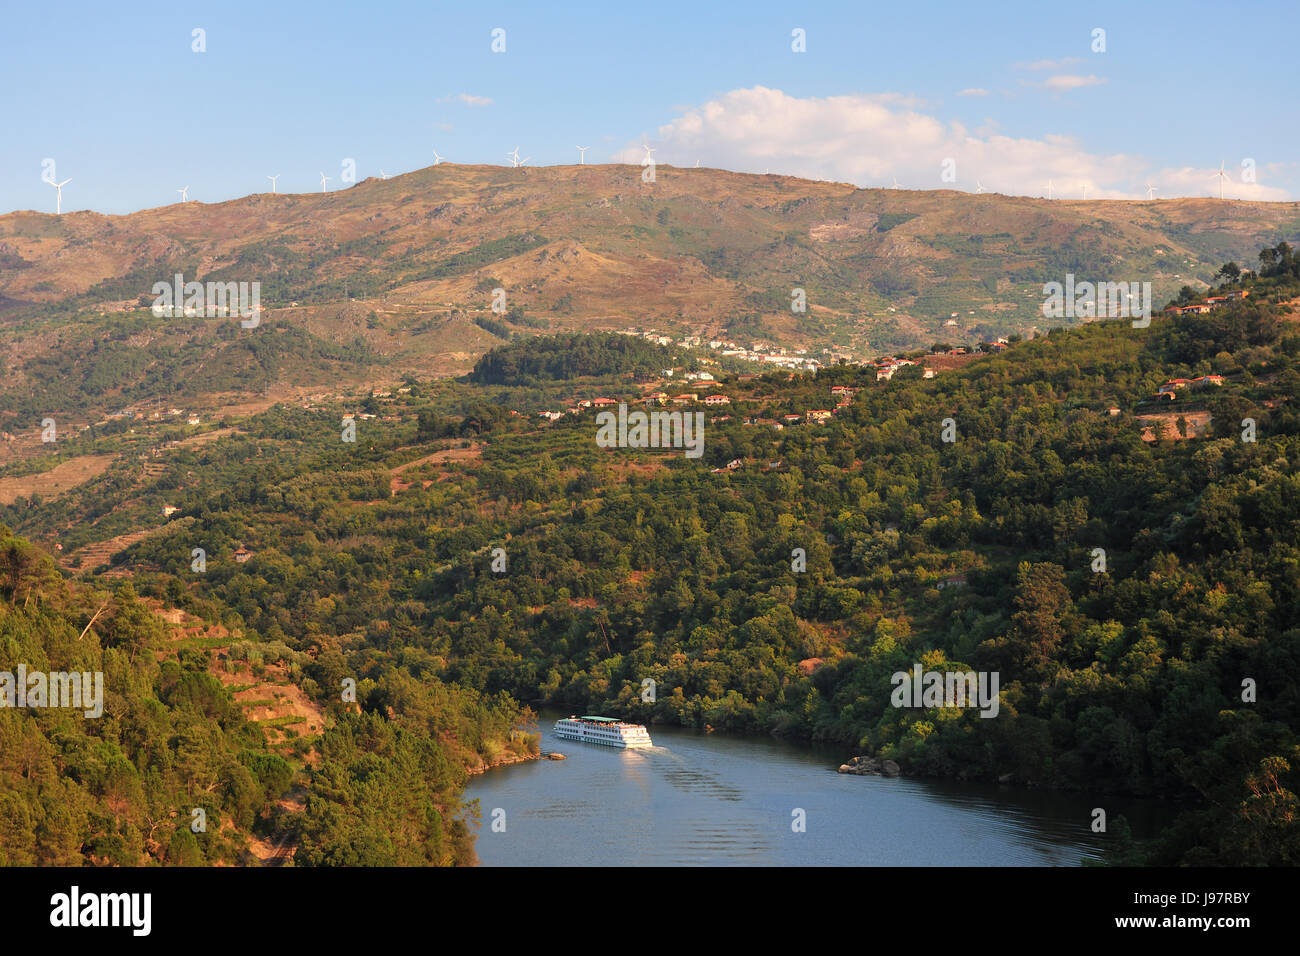 The Douro river and a hotel-ship near Resende and Montemuro mountains, Portugal Stock Photo